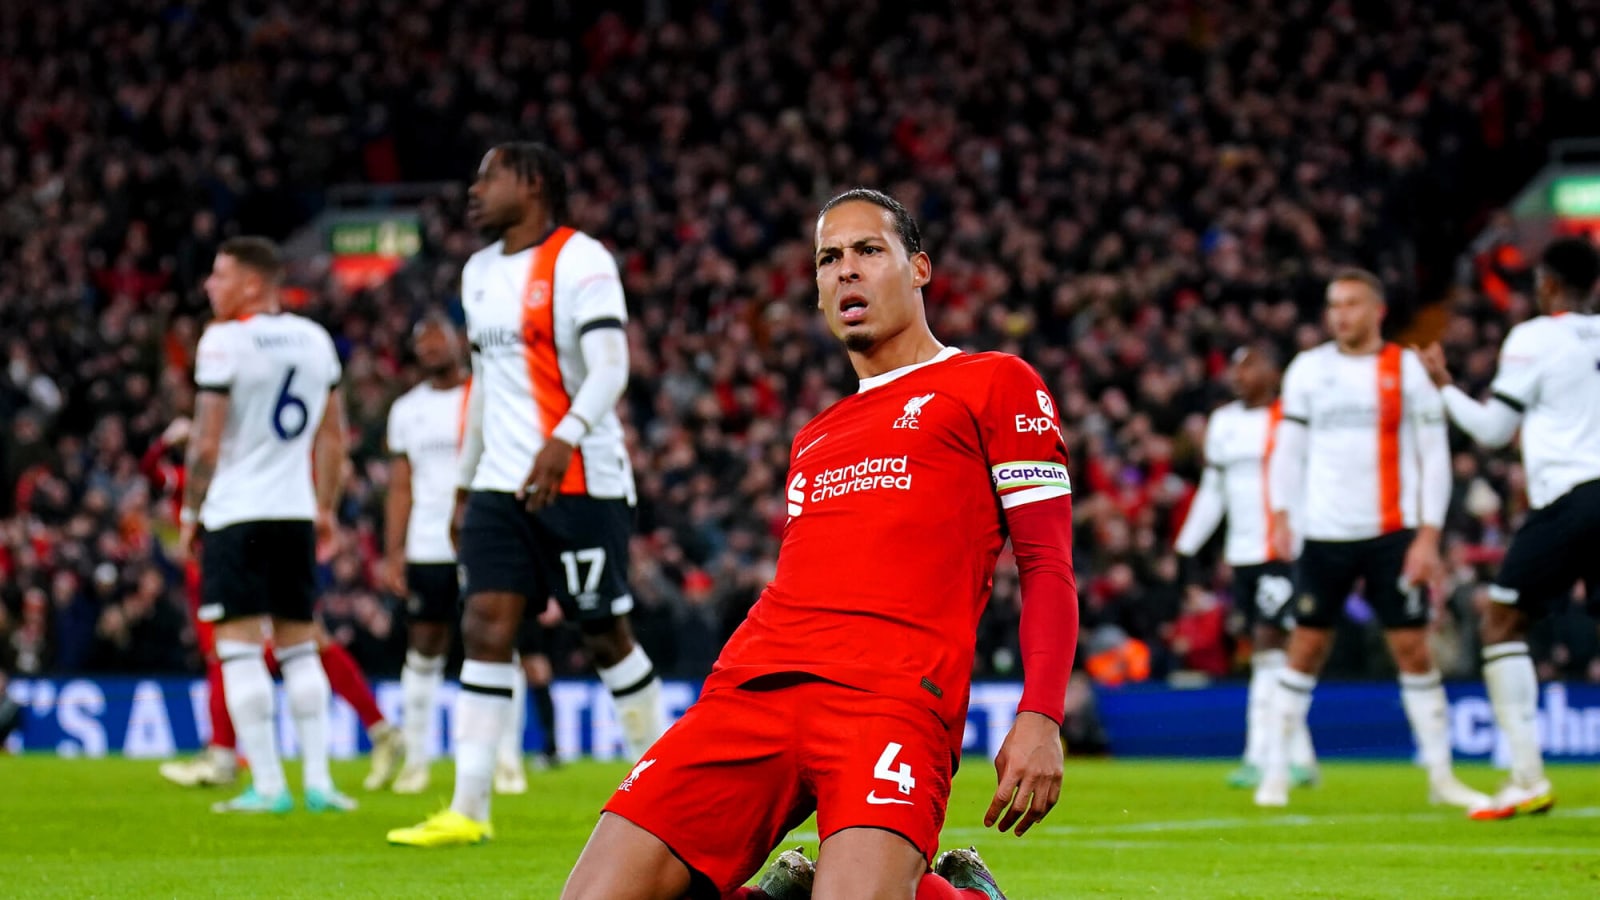 Liverpool come from behind to hit four past Luton Town